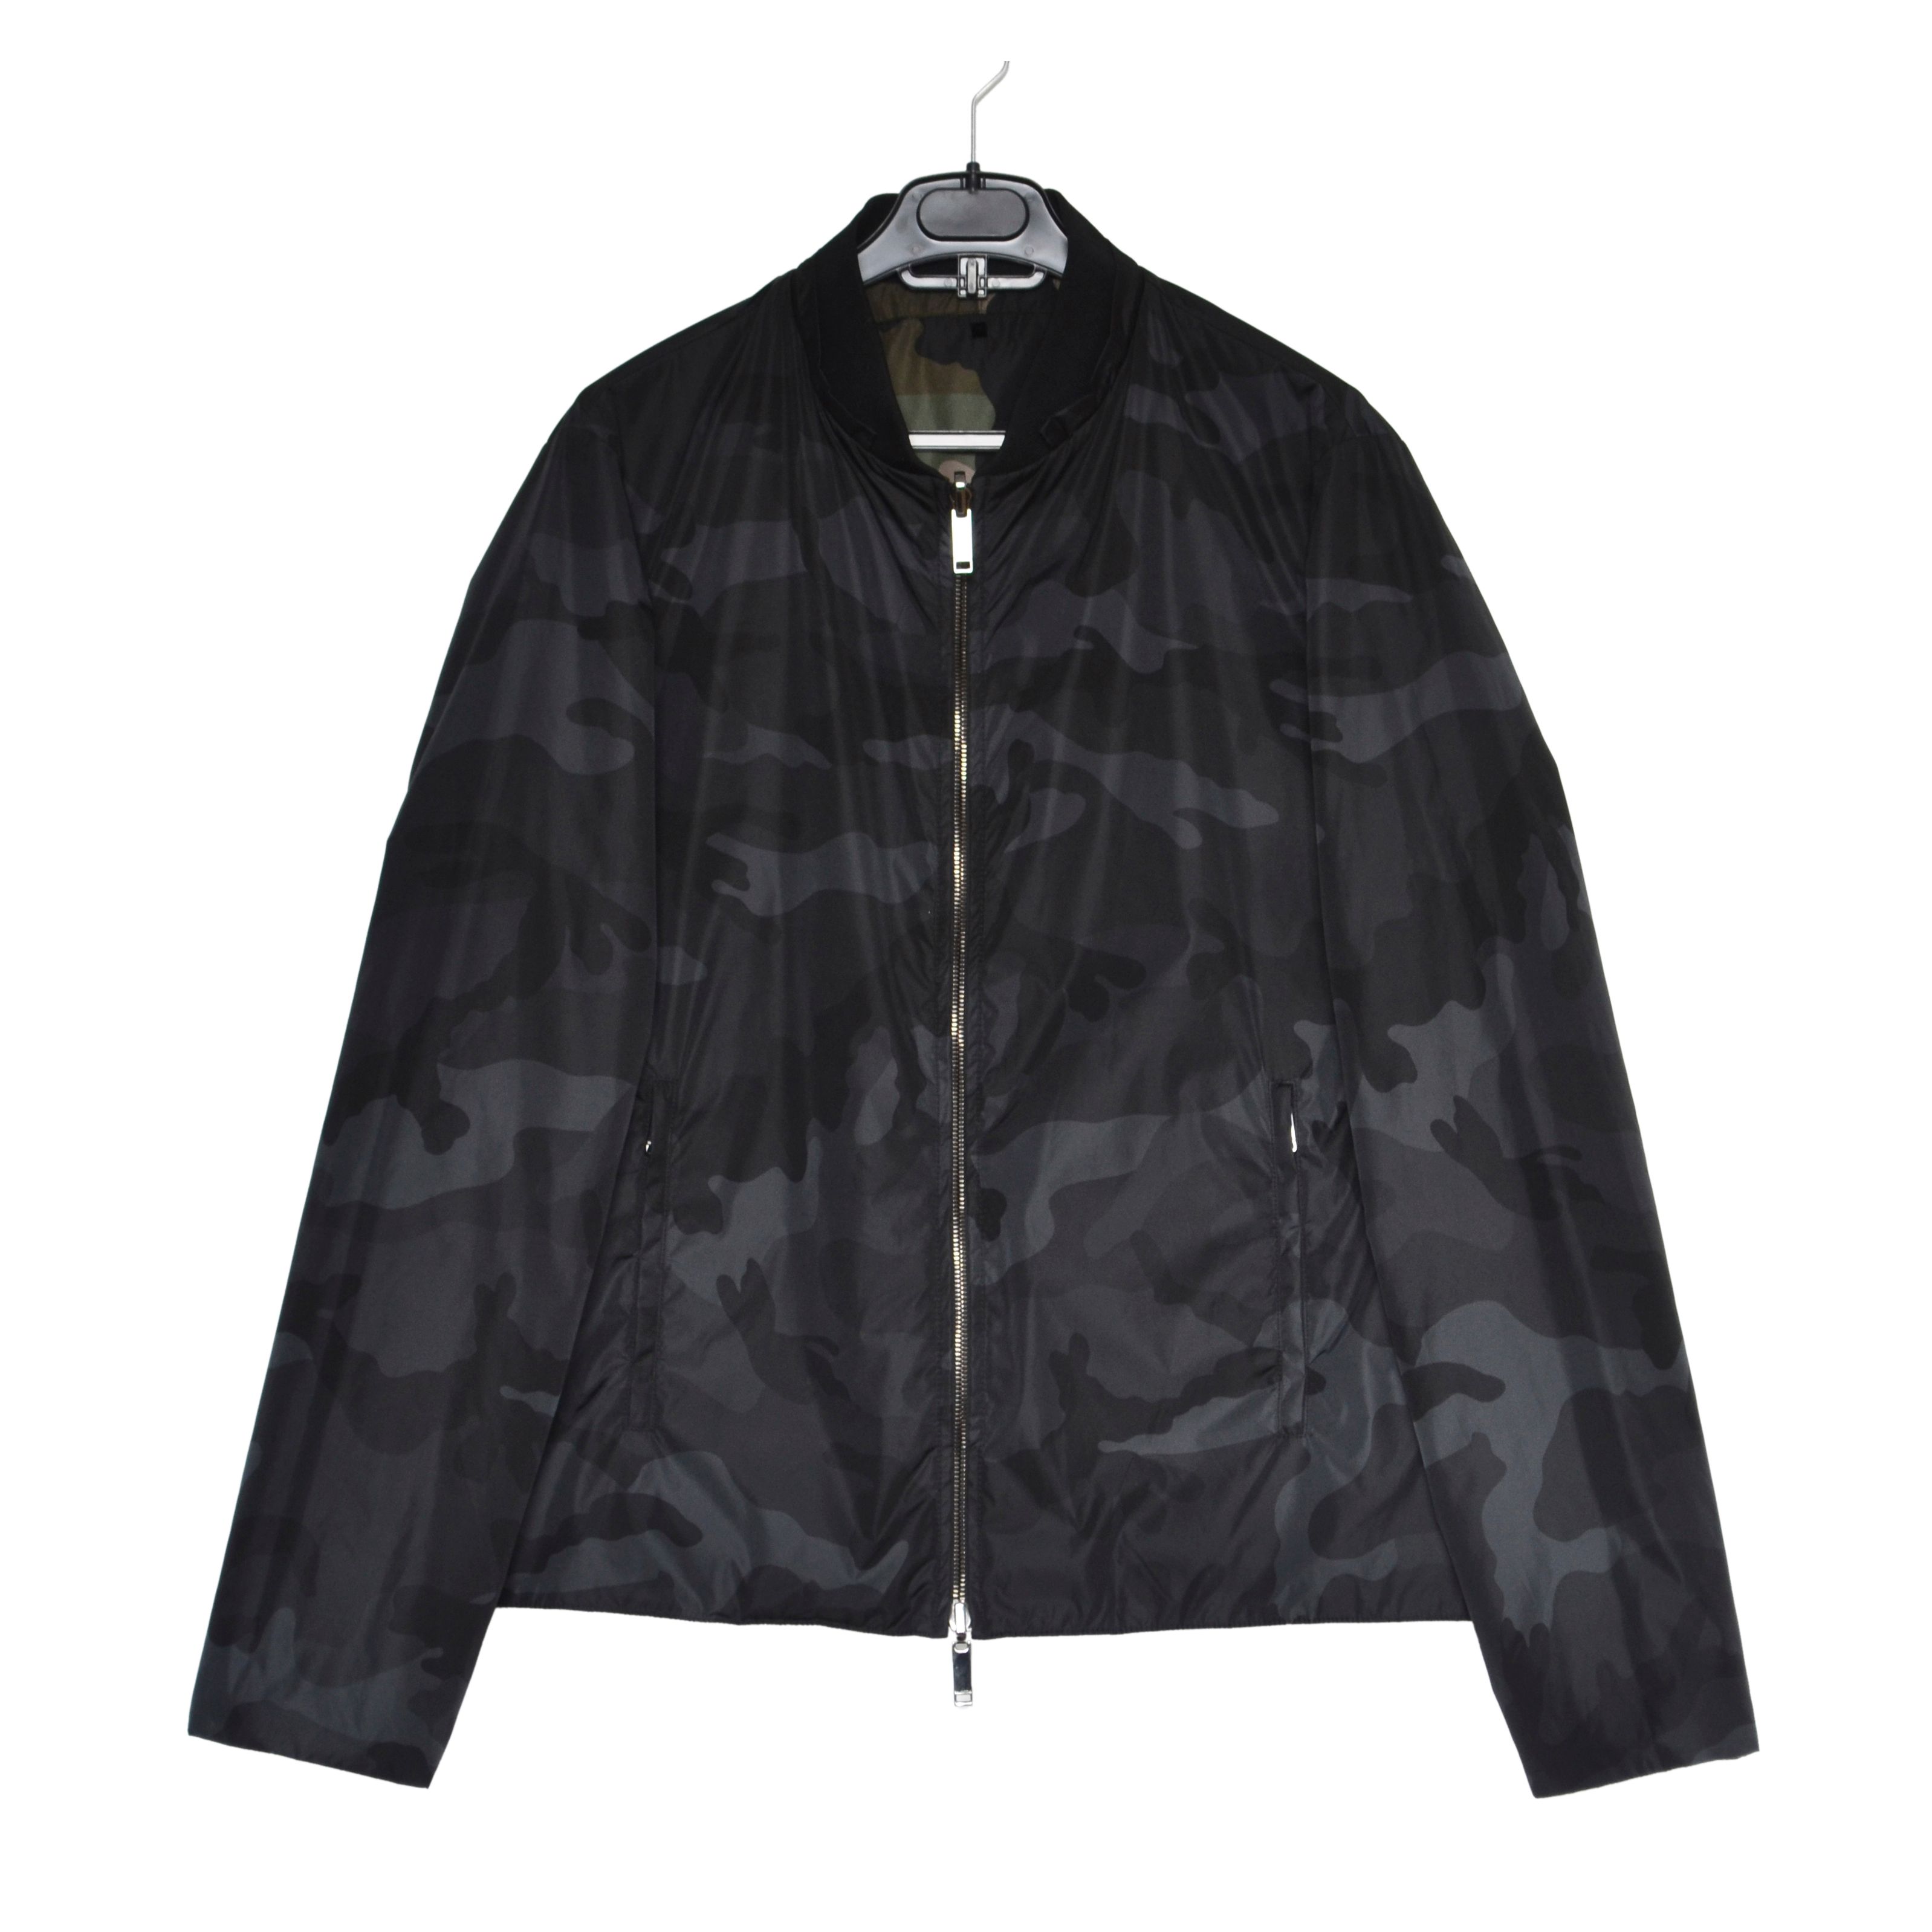 Valentino Valentino Jacket Reversible Bomber Camouflage Size US S / EU 44-46 / 1 - 2 Preview